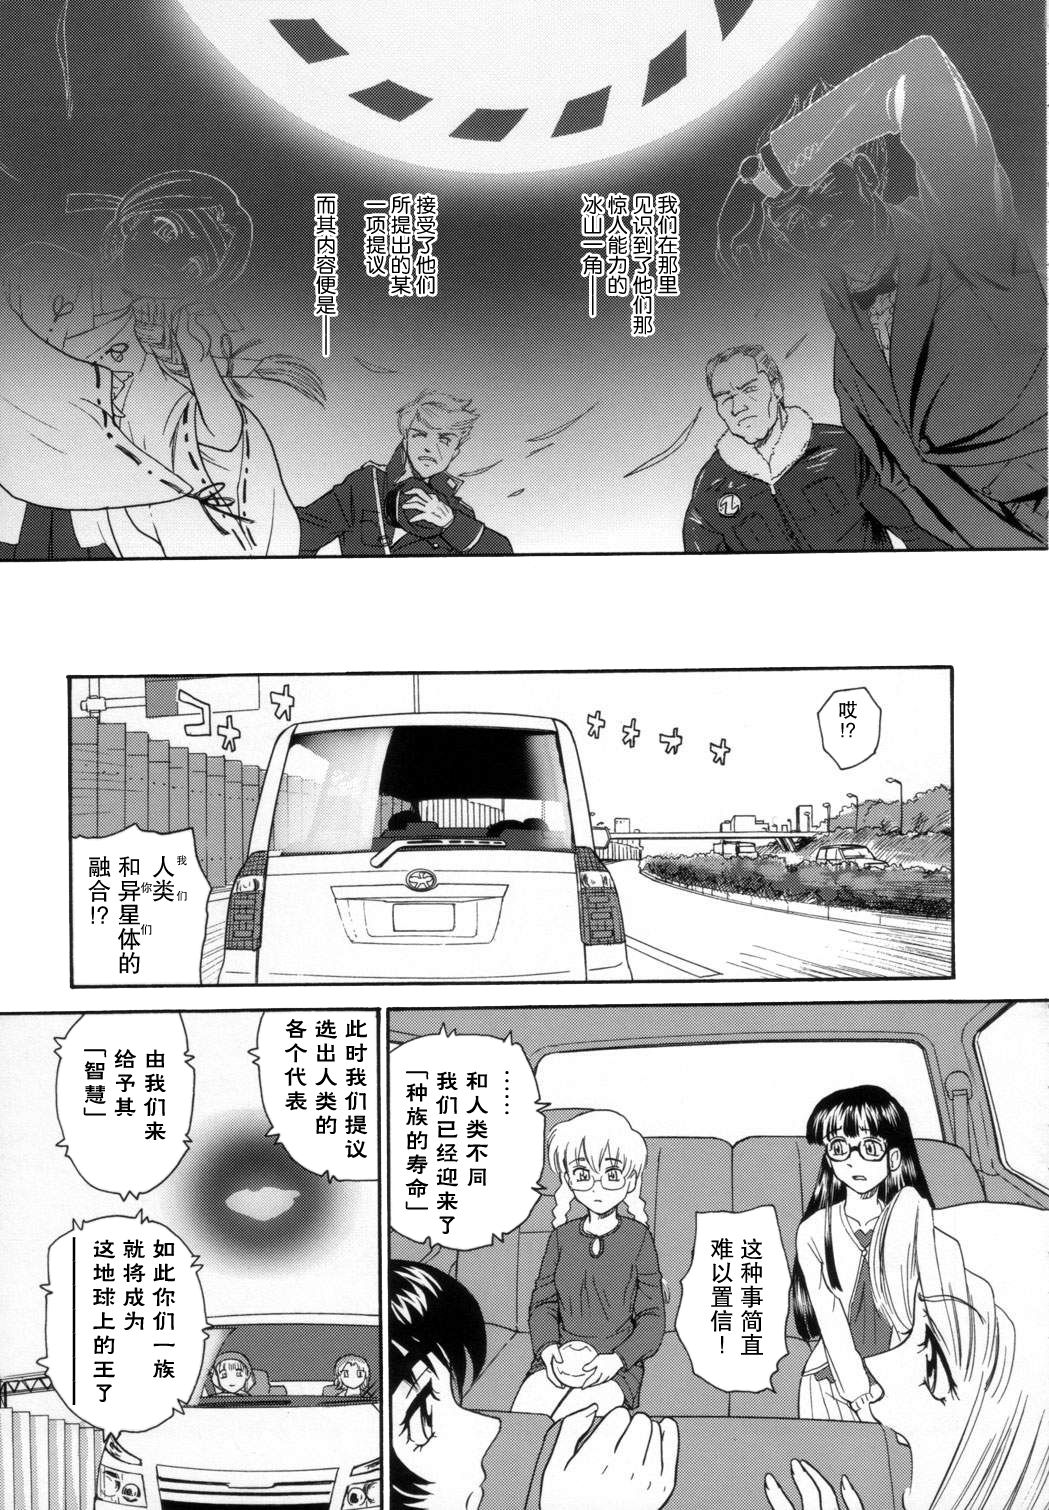 (C72) [Behind Moon (Q)] Dulce Report 9 | 达西报告 9 [Chinese] [哈尼喵汉化组] [Decensored] page 29 full